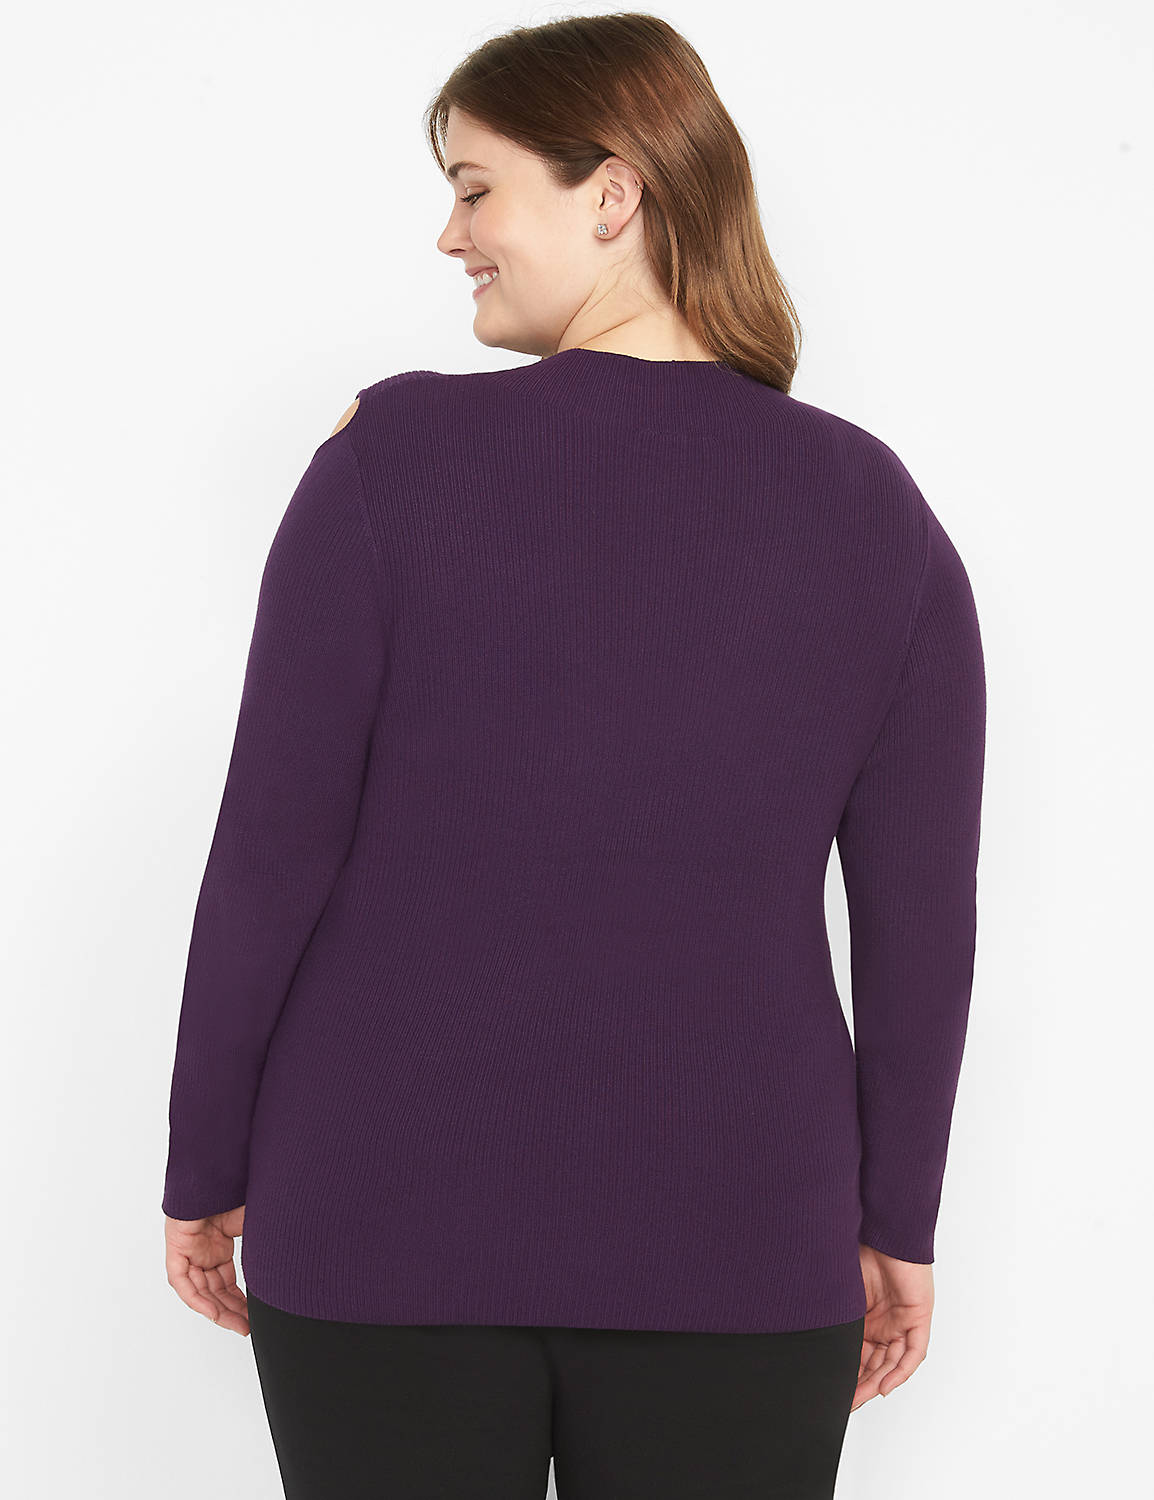 Long Sleeve Mock Neck Cut Out Rib Pullover 1124485:PANTONE Purple Pennant:10/12 Product Image 2